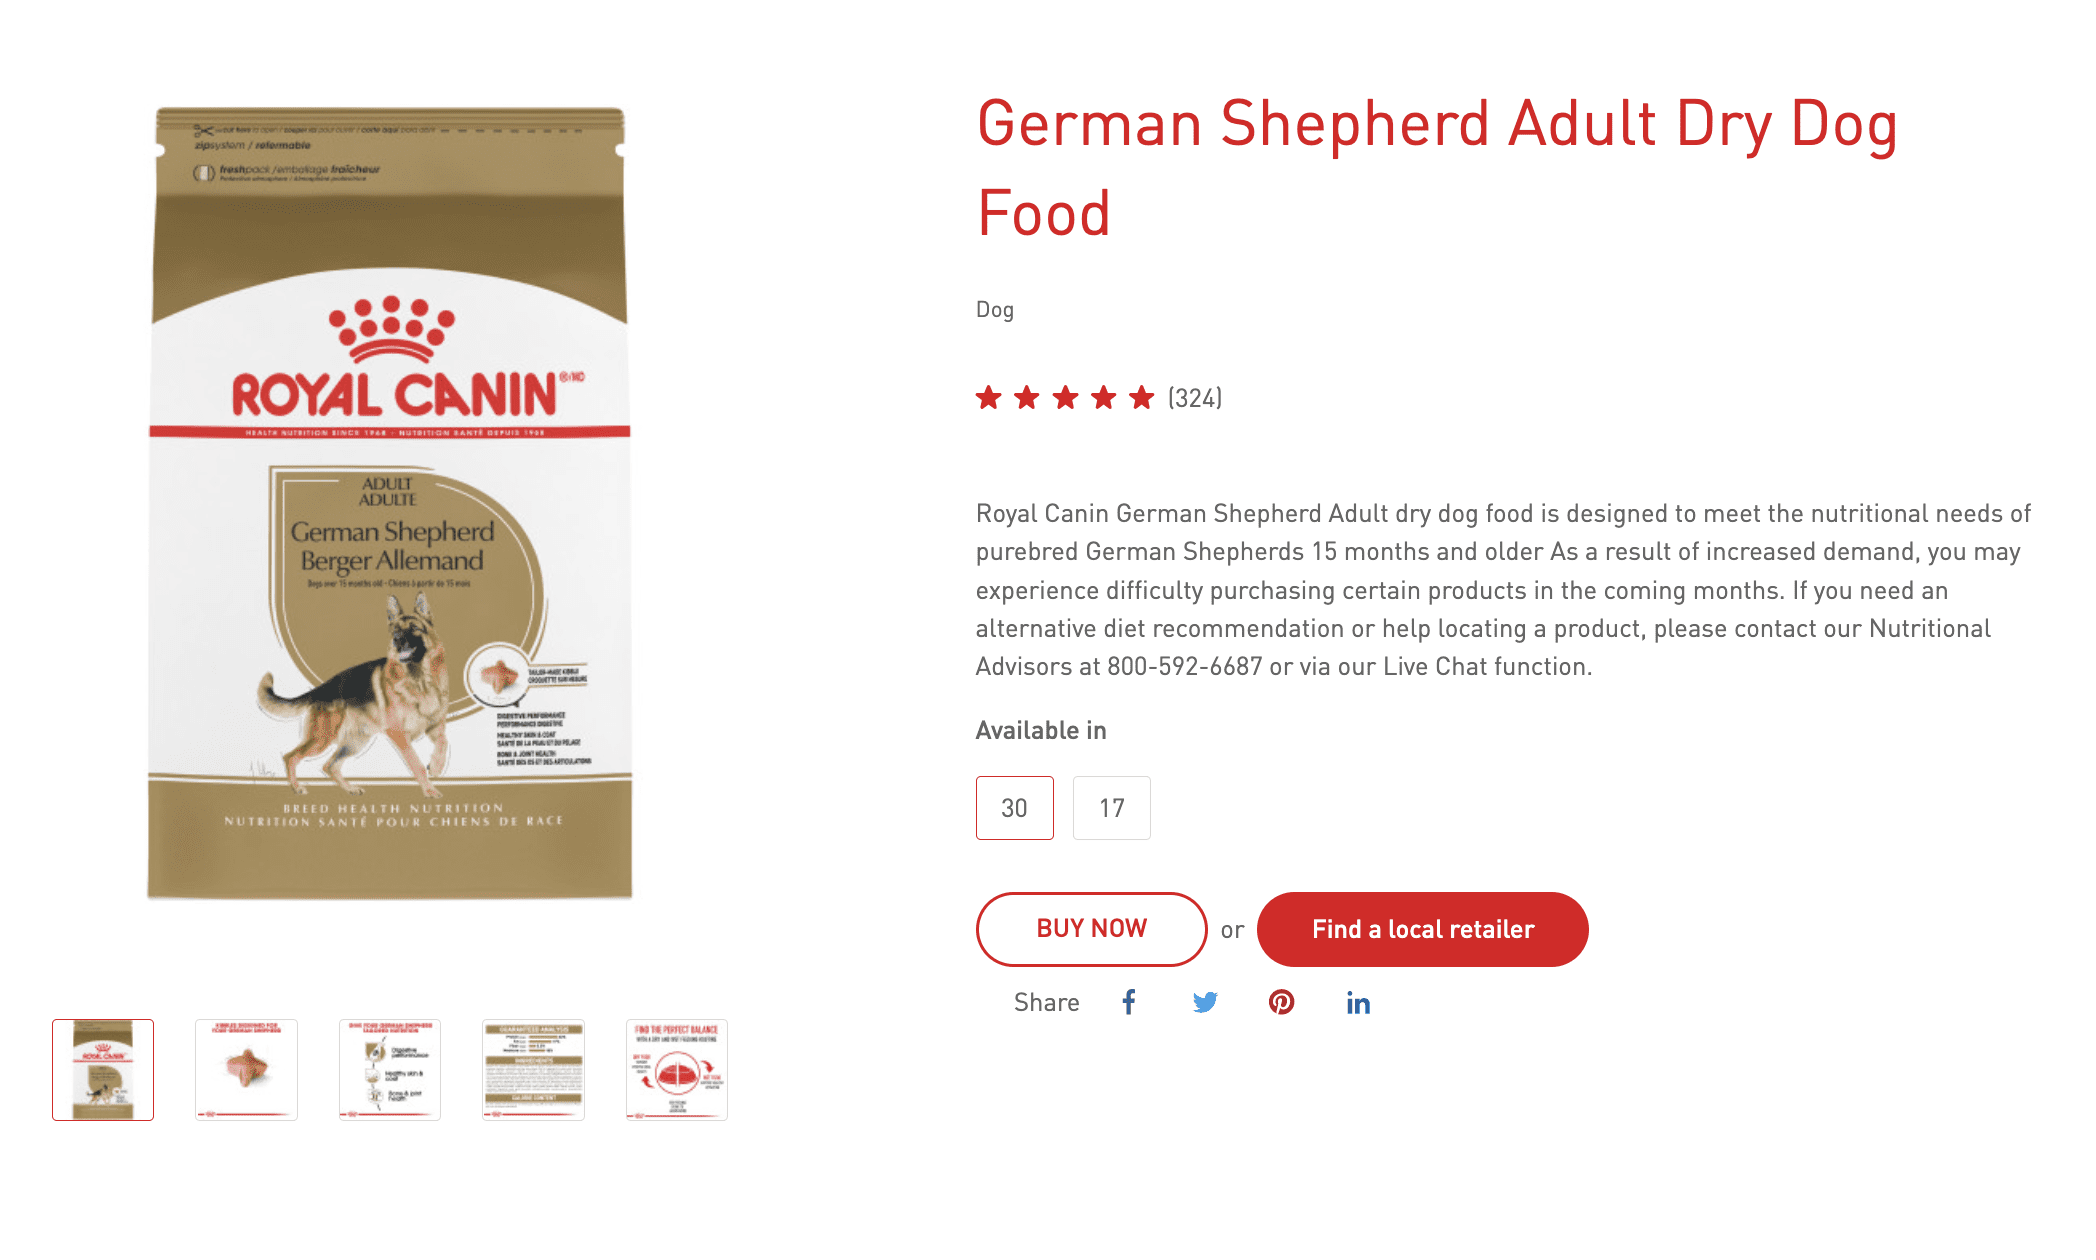 Is Royal Canin German Shepherd Dog Food Any Good? Read This First